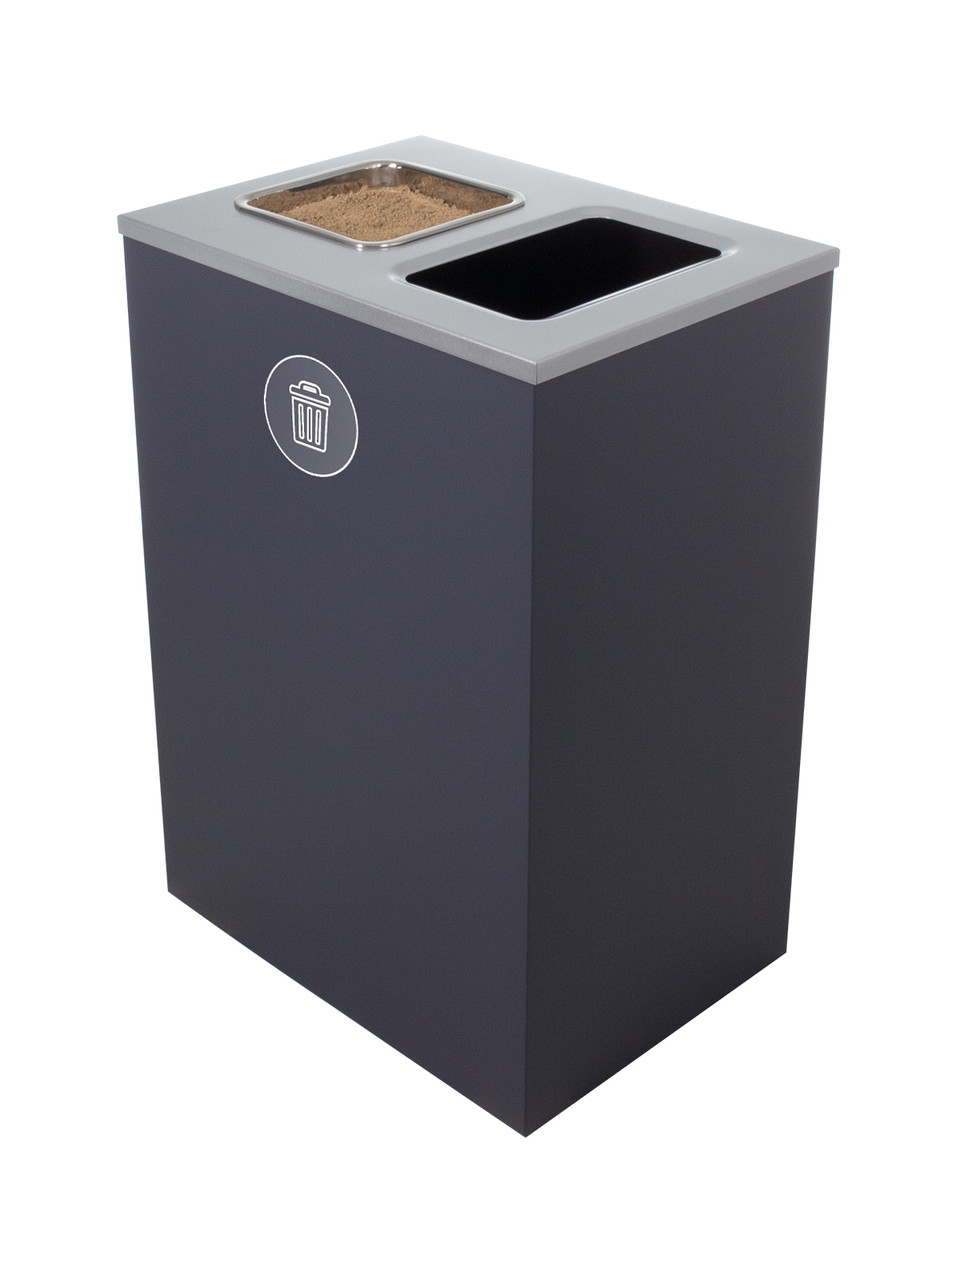 32 Gallon Steel Spectrum Cube XL Ash and Trash Can Gray 8107138-4